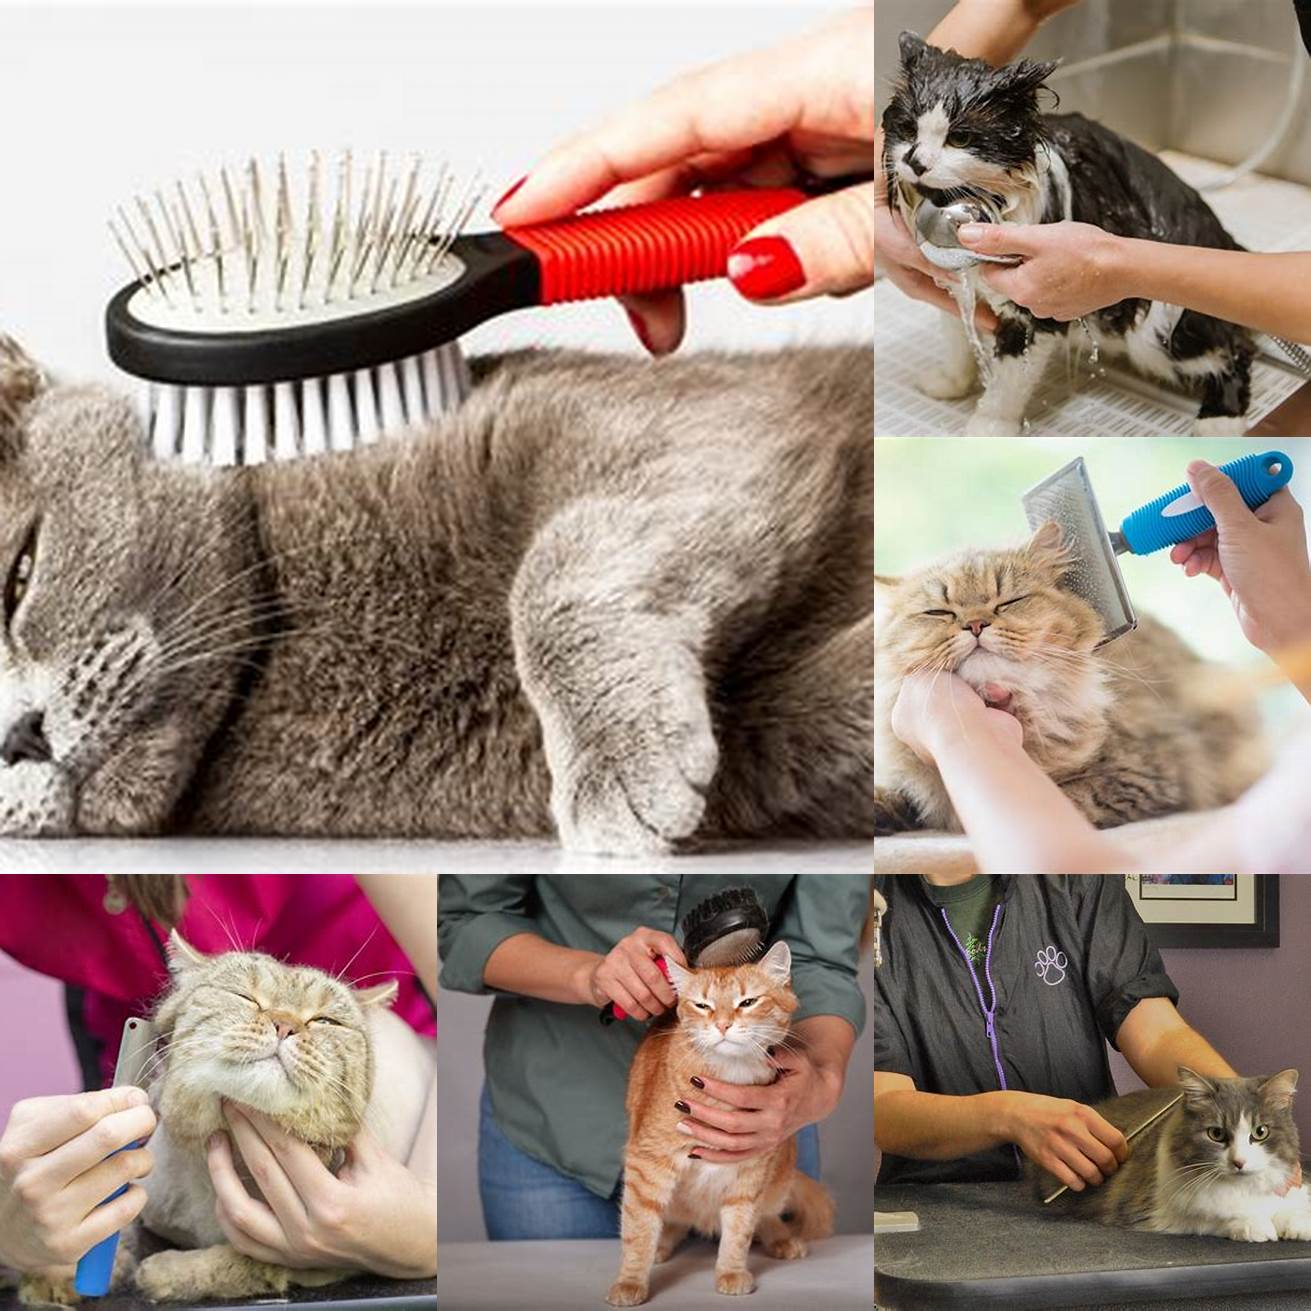 6 Pet grooming and hygiene